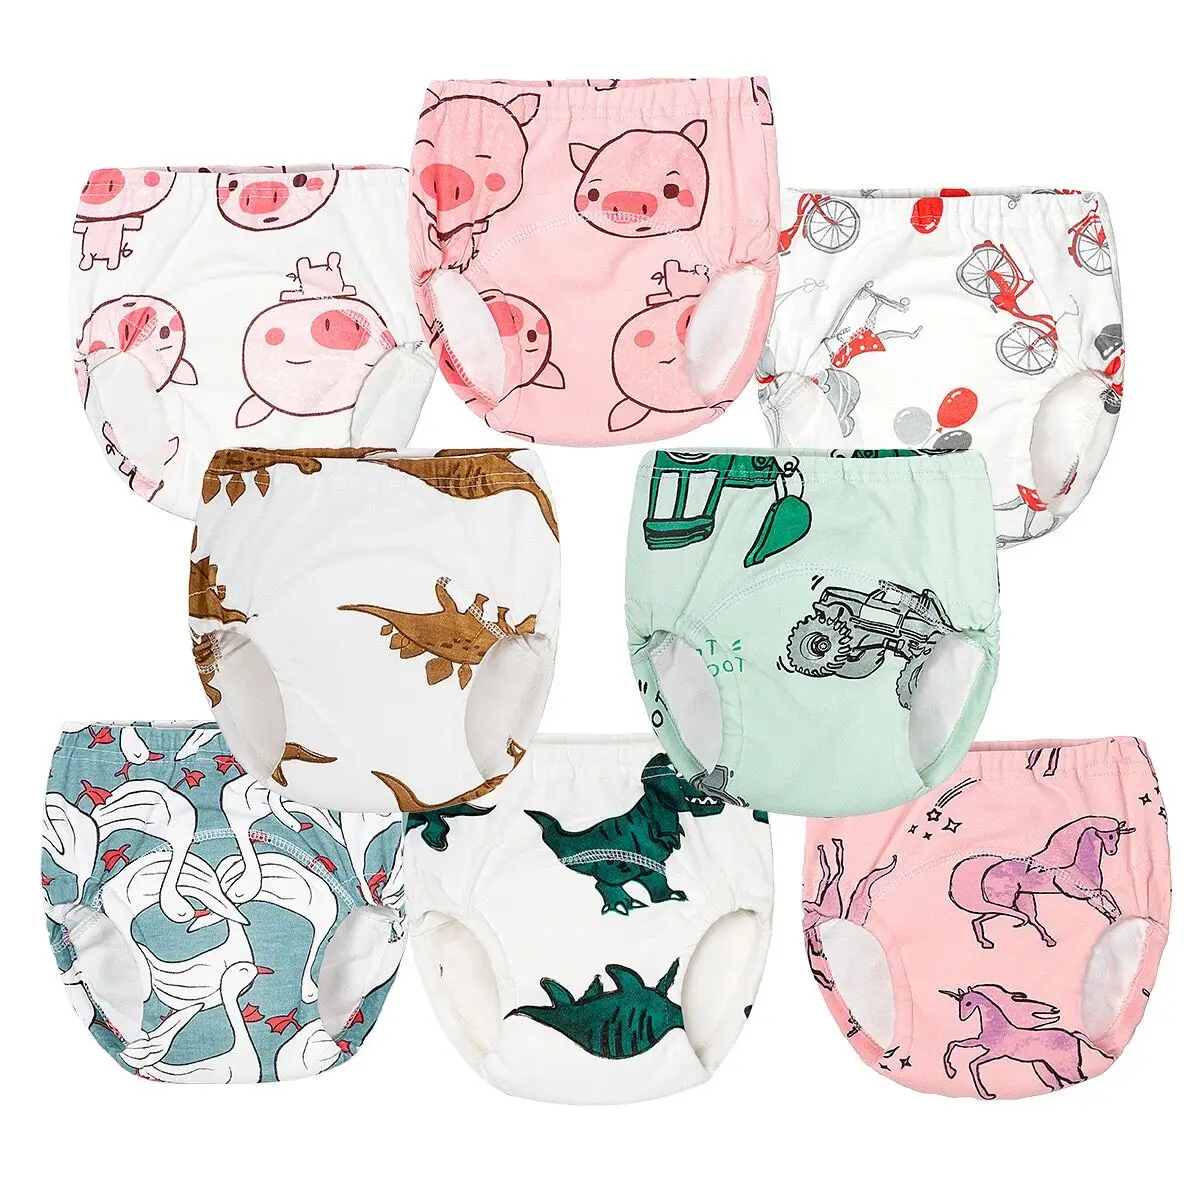 Baby Potty Toilet Training Pants Nappies Cartoon Boys Girls Underwear for Toddler Cotton Panties Reusable Diapers Cover